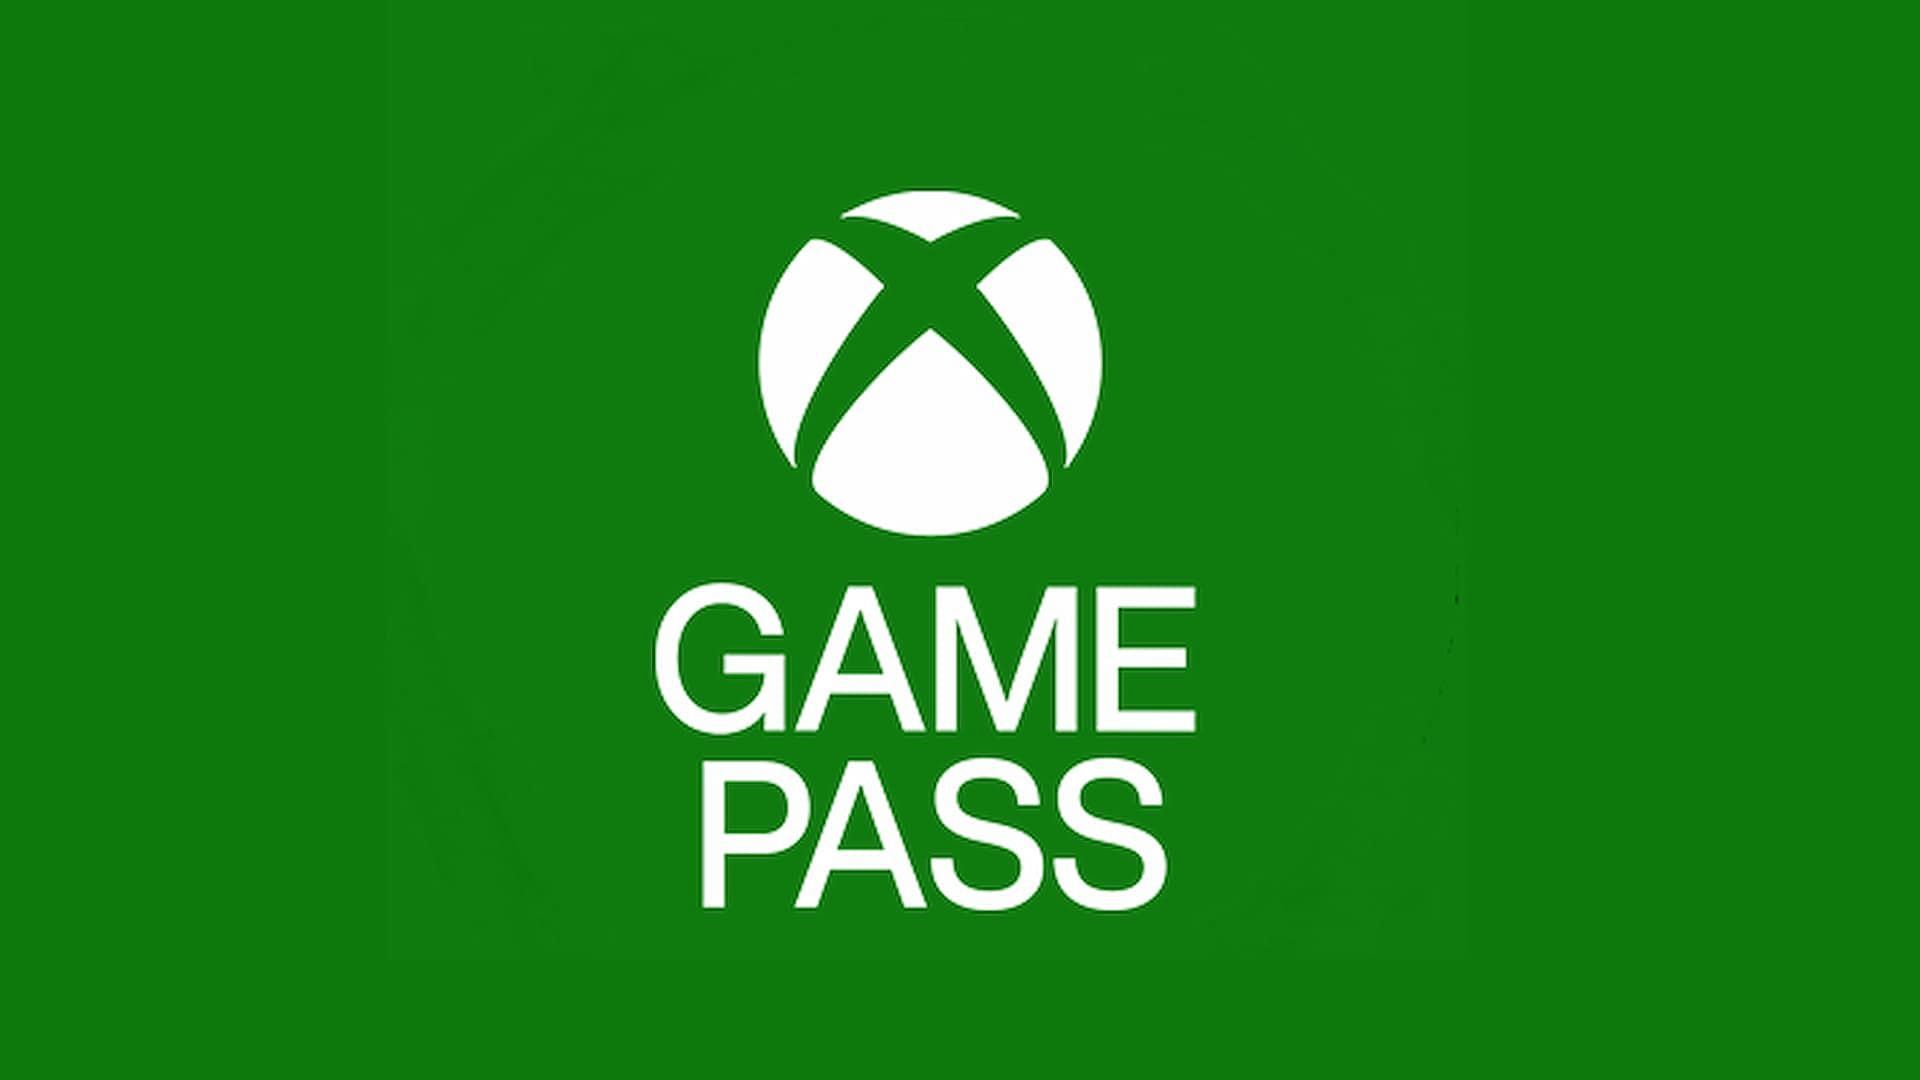 Xbox Game Pass will be exclusive to the Xbox (Image via Xbox)